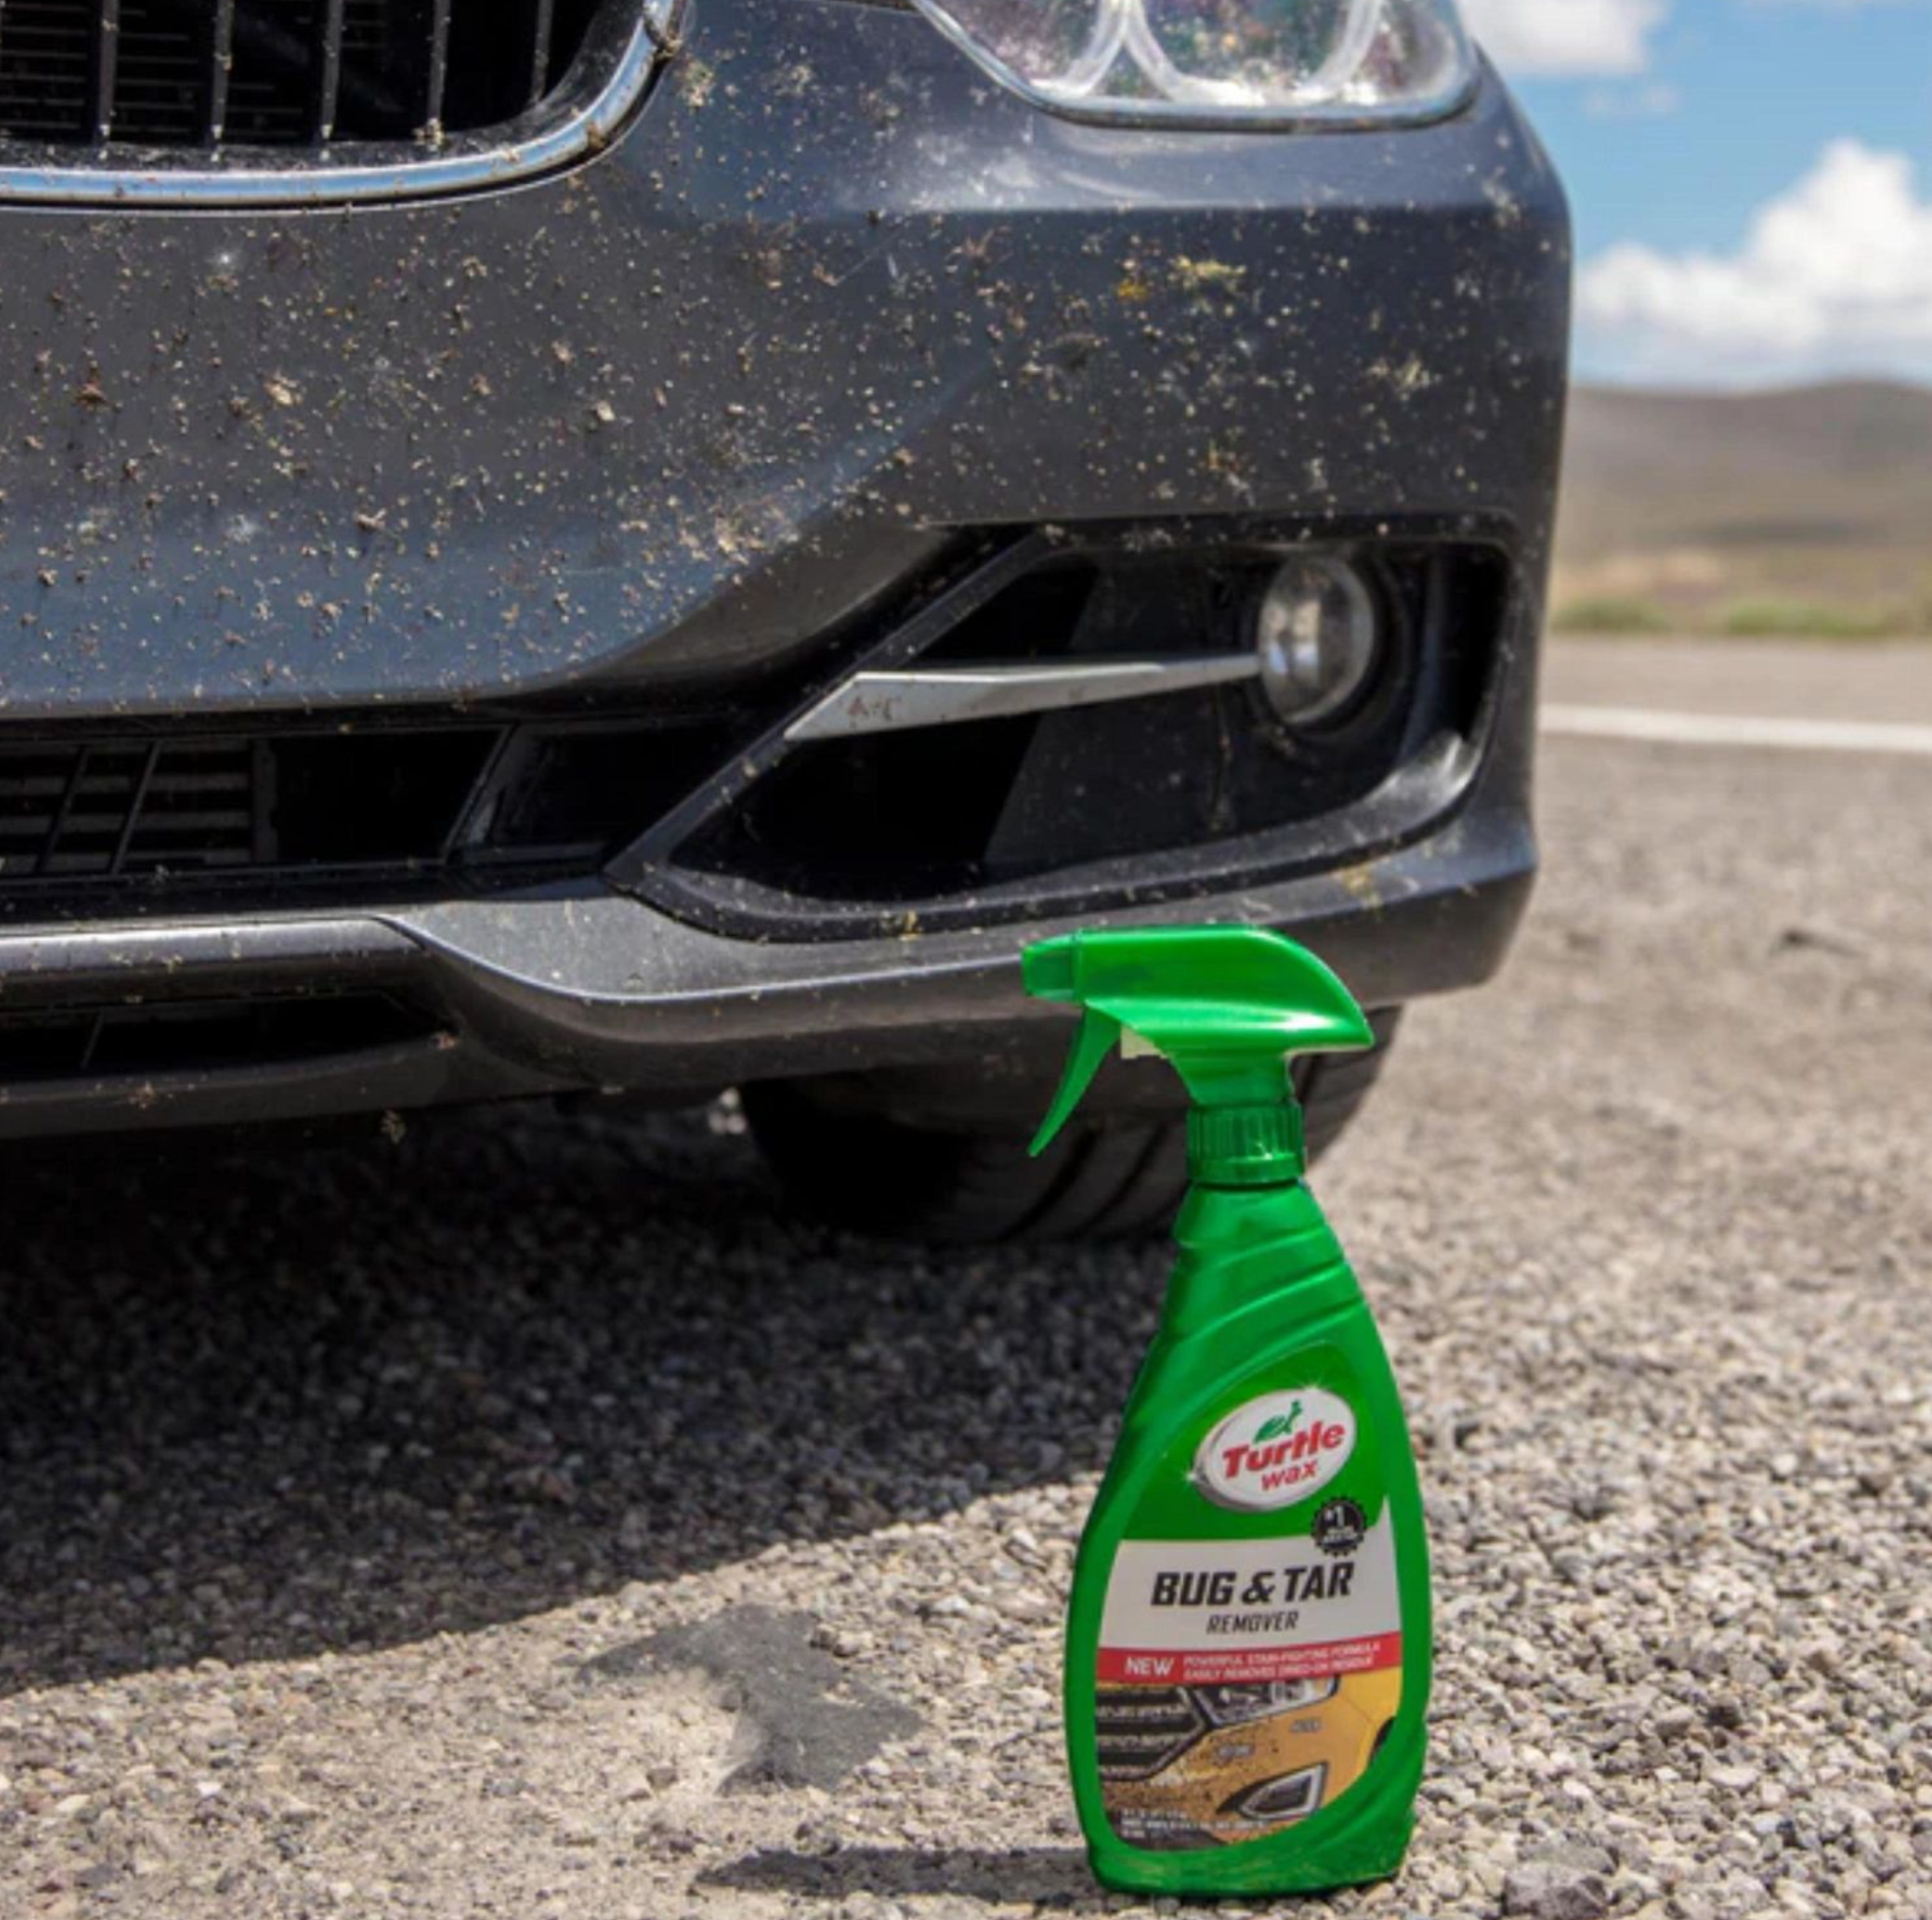 Bug & tar removers for your car ▷ at low prices